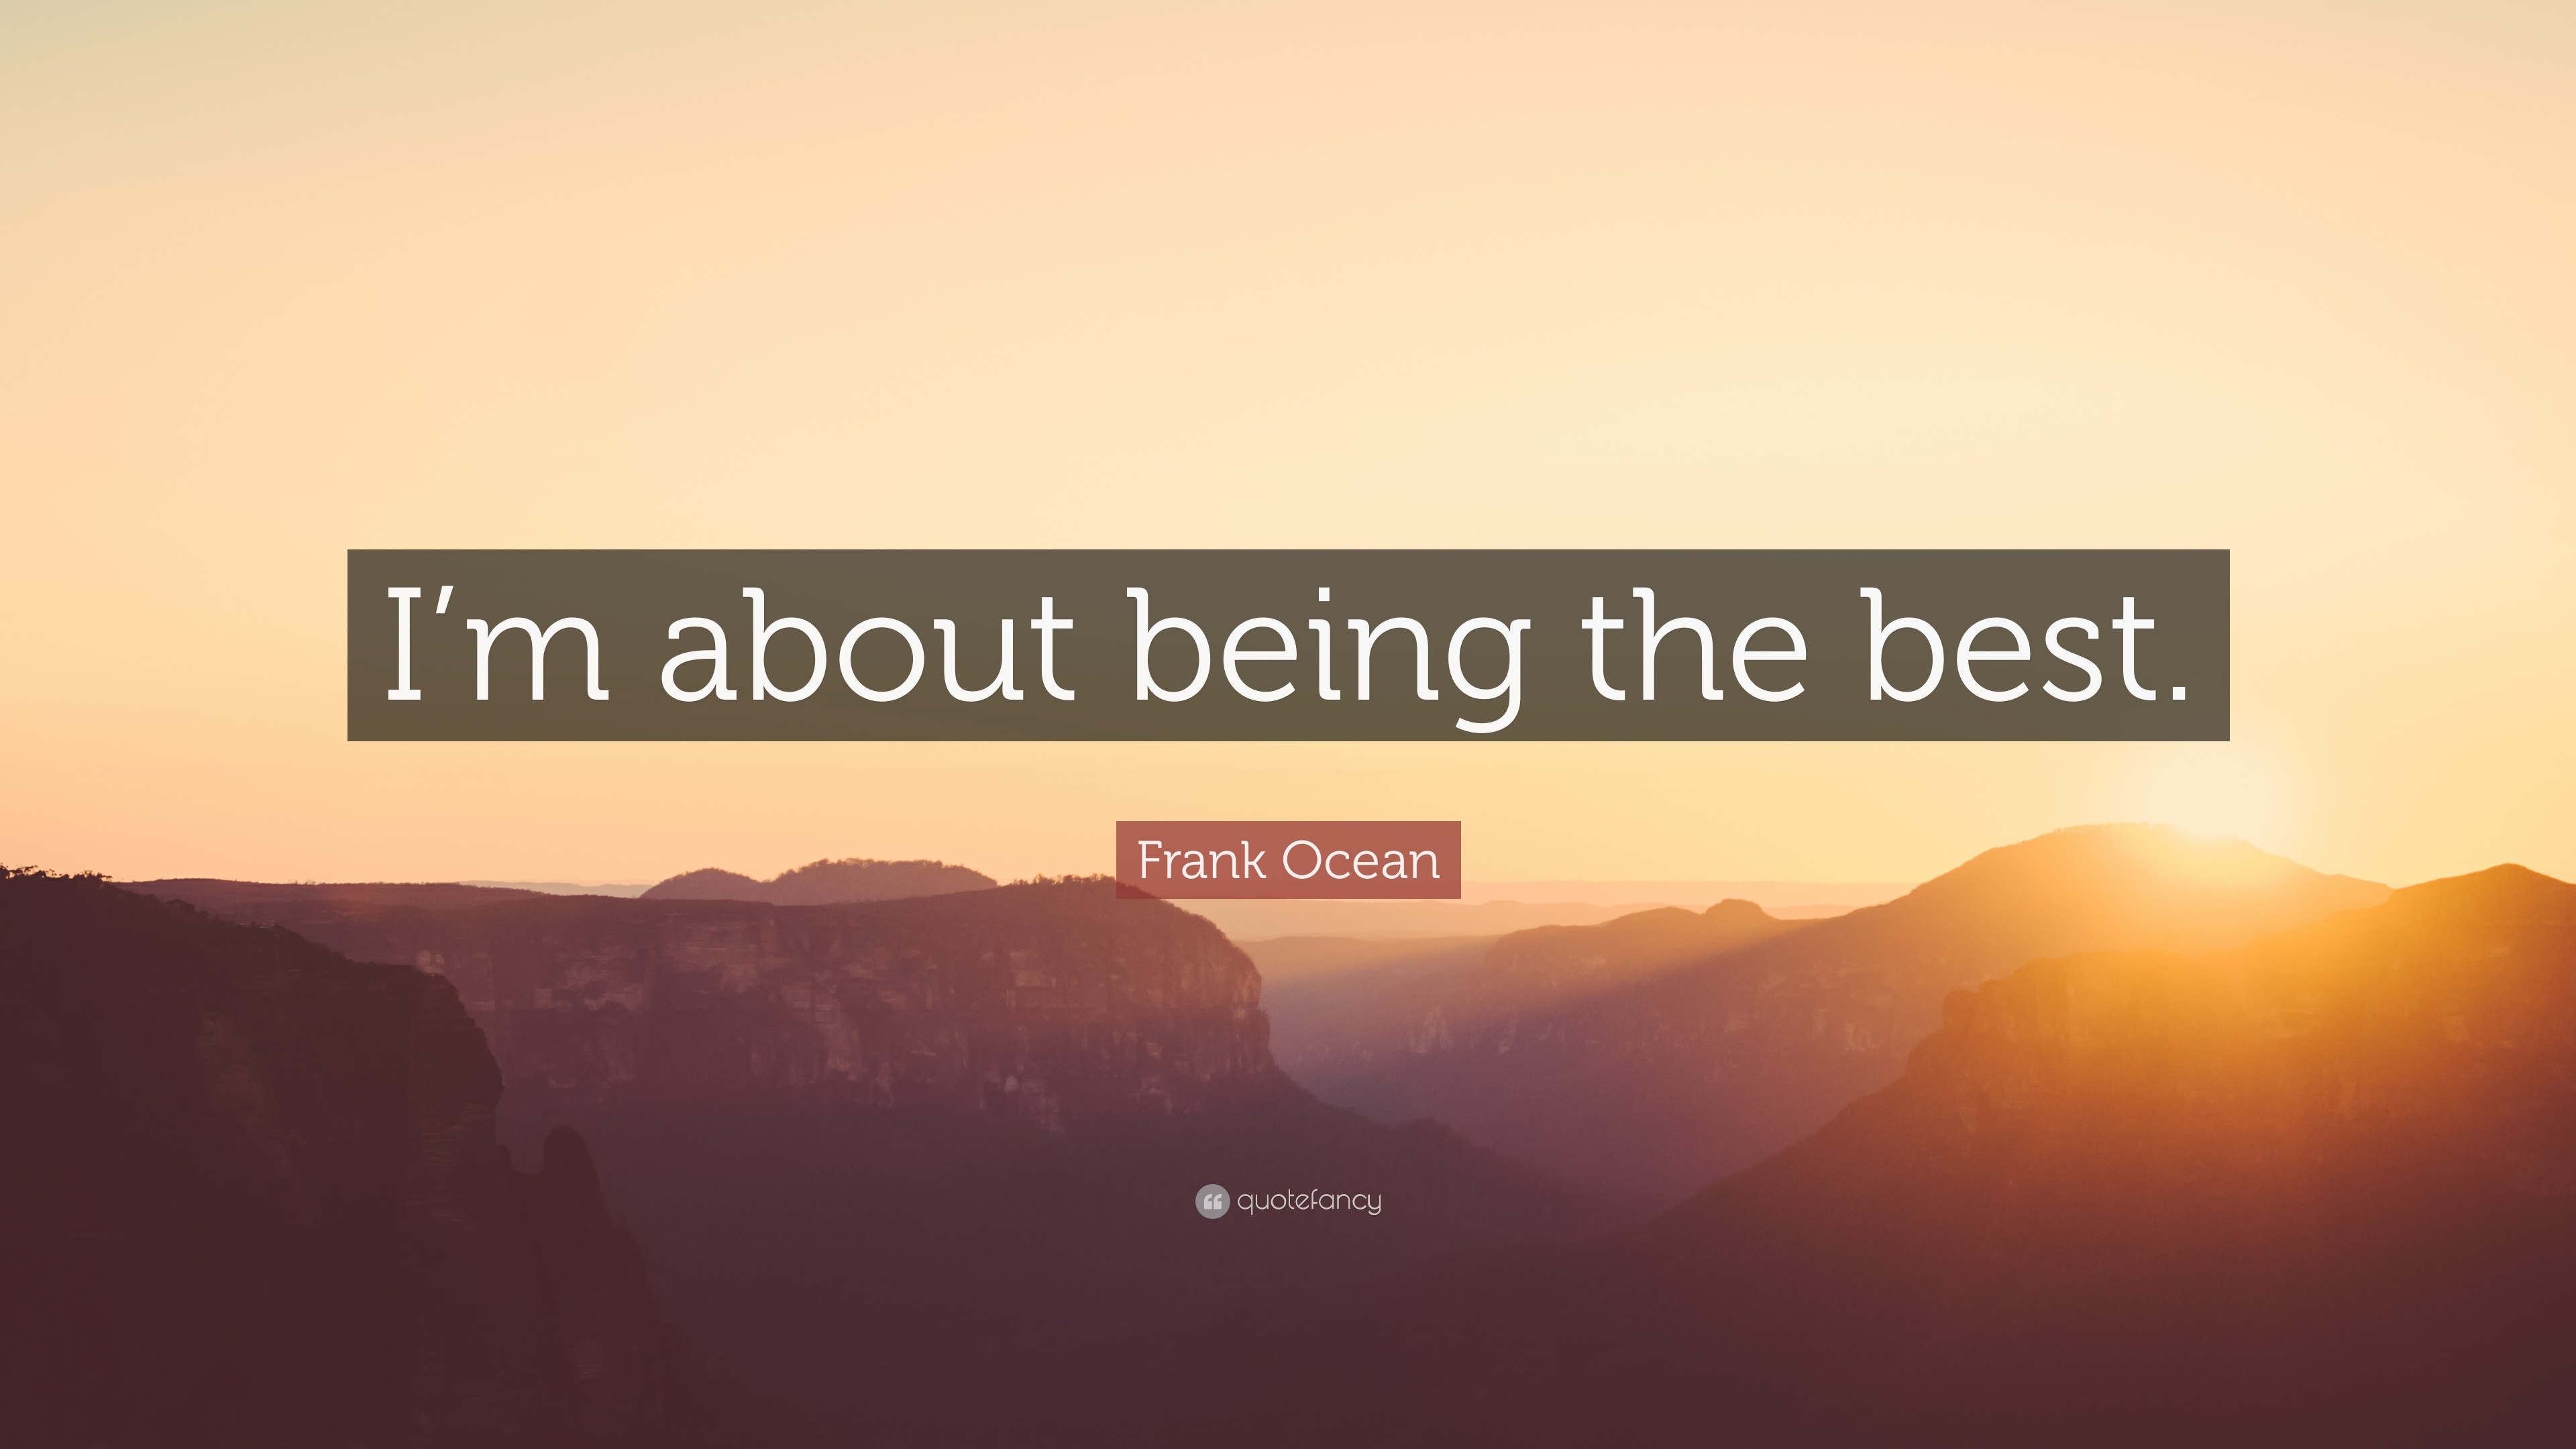 3840x2160 Frank Ocean Quote: “I'm about being the best.”